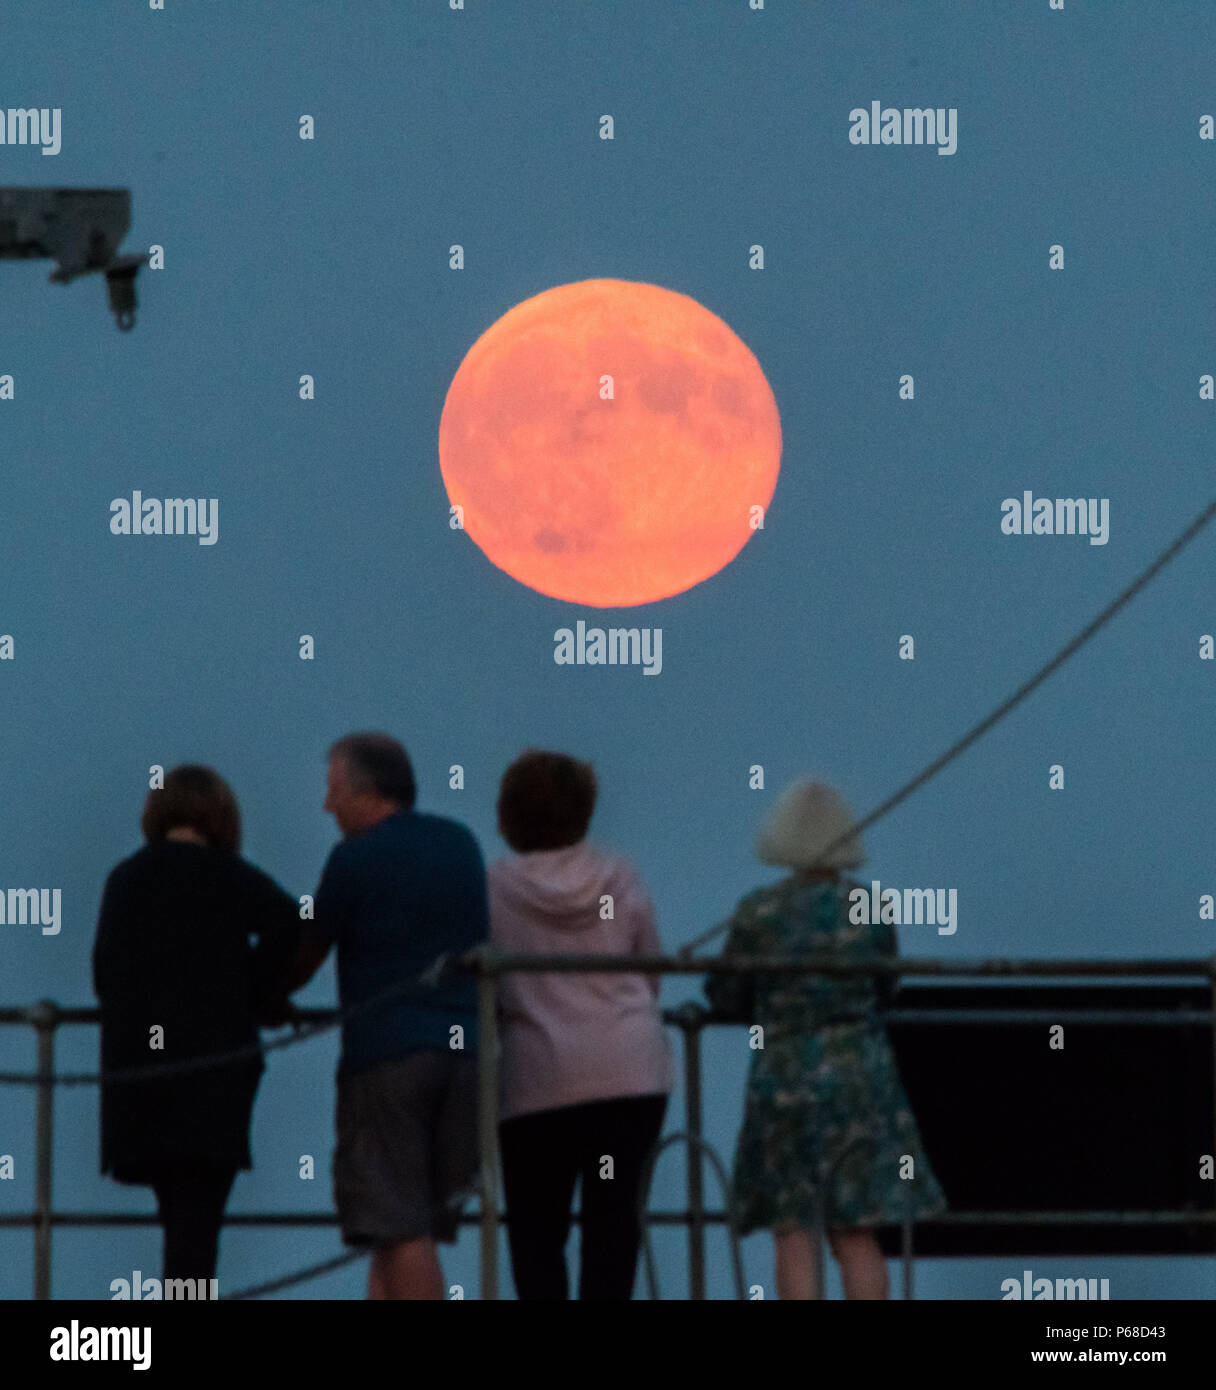 Mousehole, Cornwall, UK. 28th June 2018. UK Weather. A group of friends stand on the harbour wall at Mousehole, watching the full Strawberry moon rise. Credit: cwallpix/Alamy Live News Stock Photo